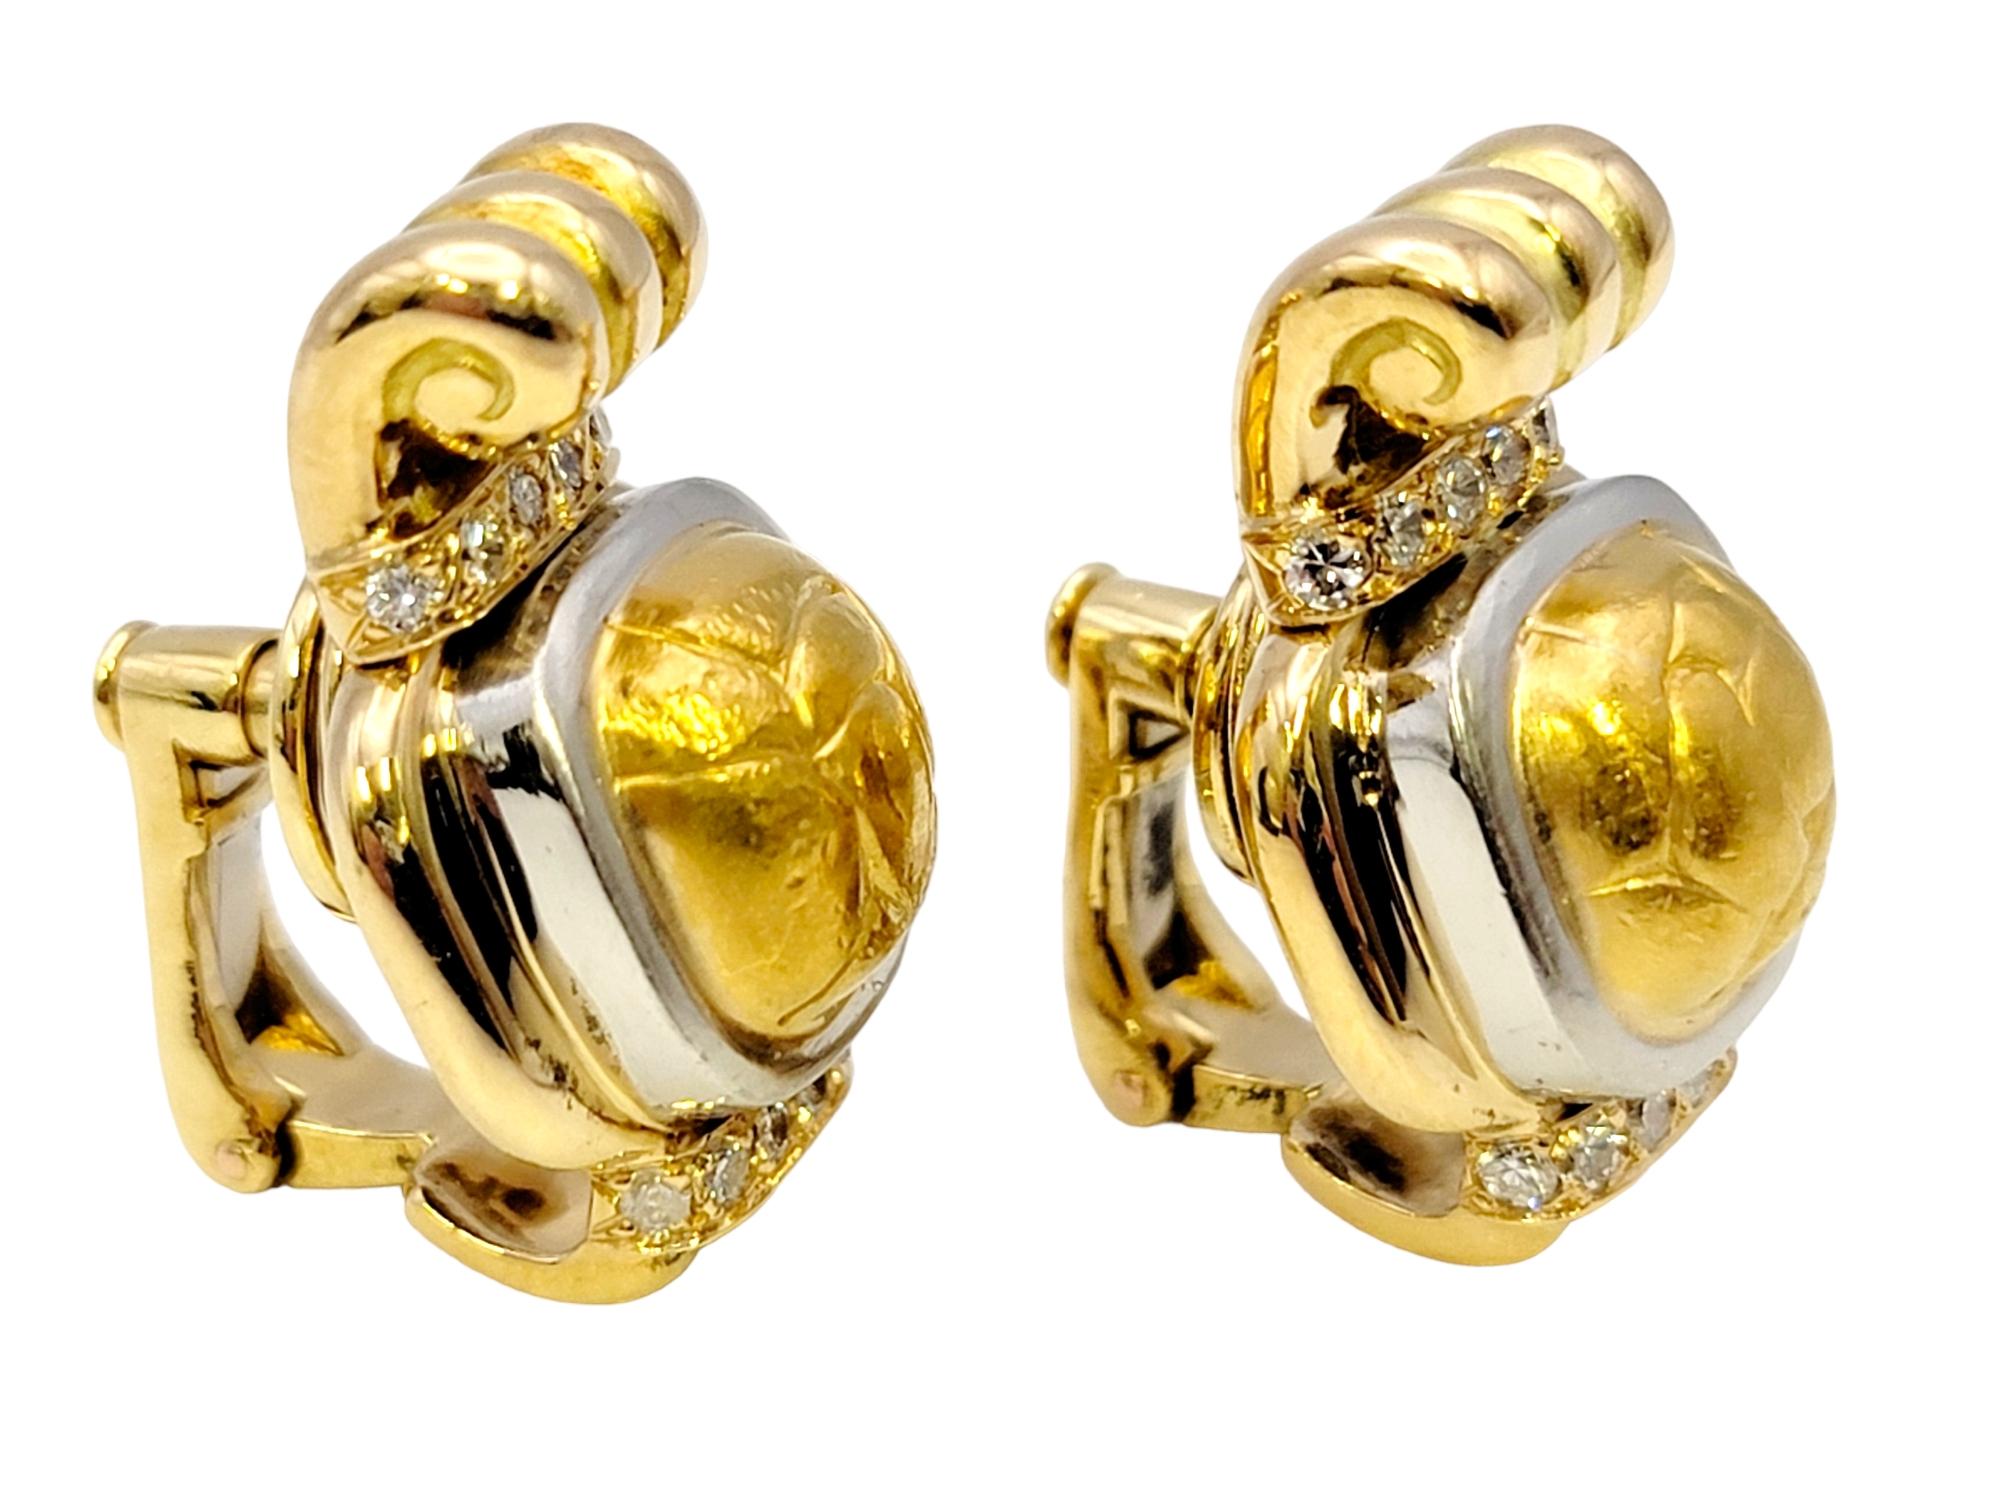 Contemporary Chaumet 18 Karat Yellow Gold Nugget Style Clip-On Stud Earrings with Diamonds For Sale